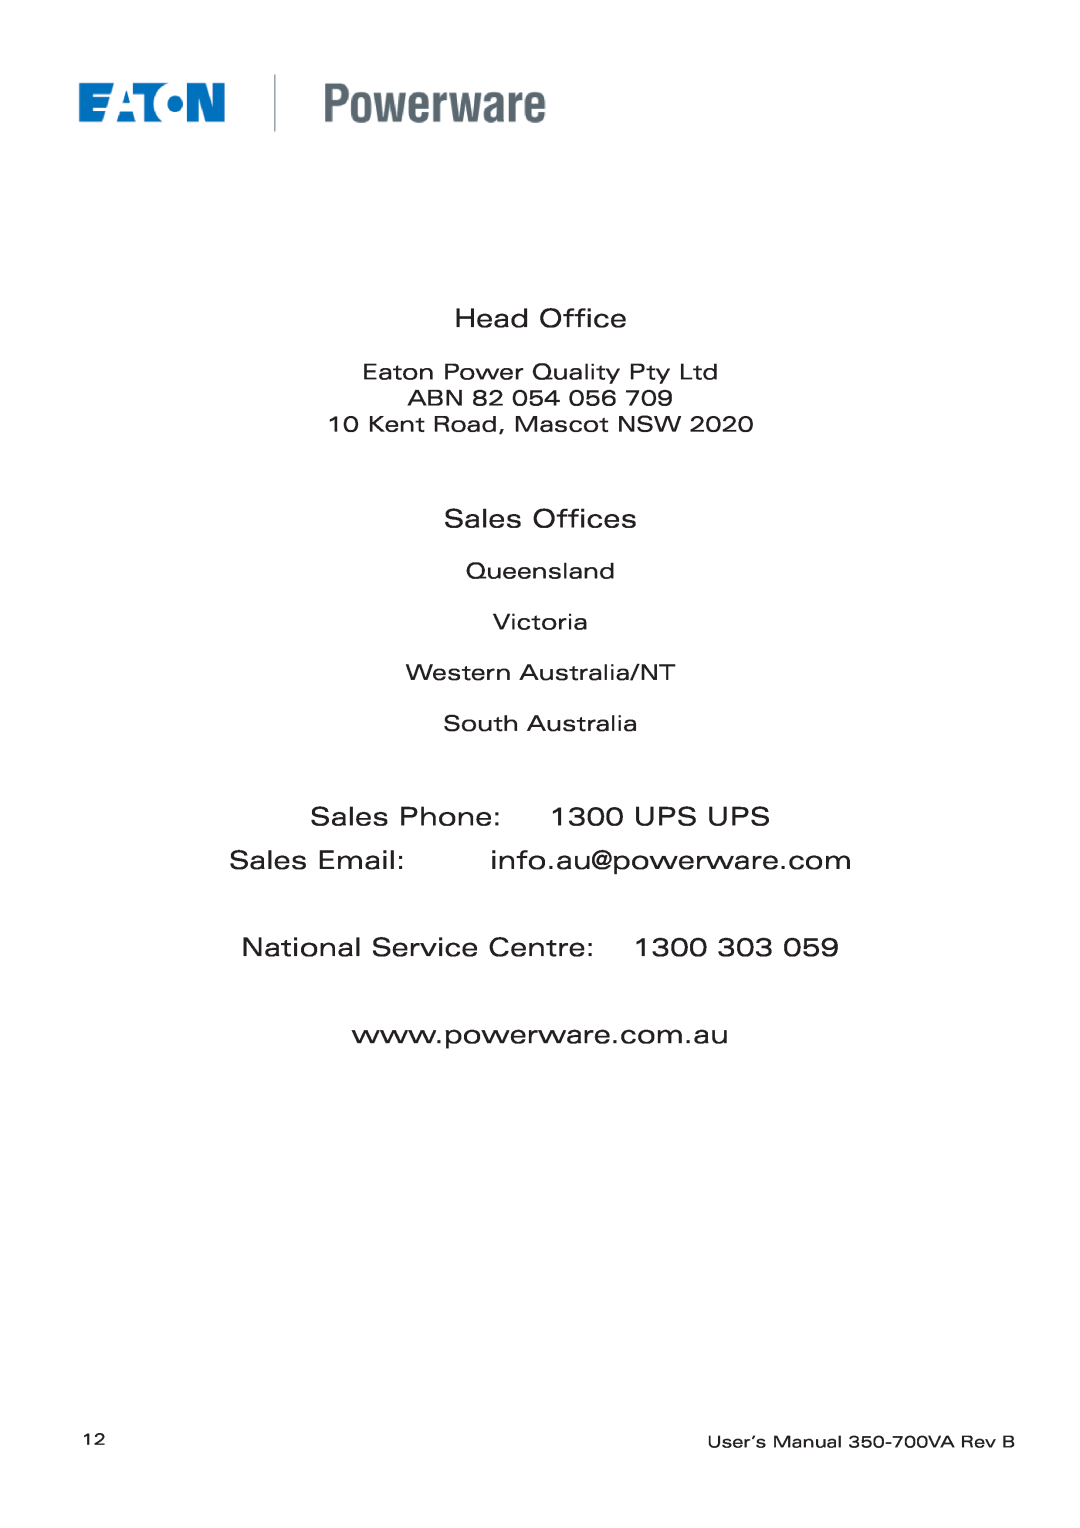 Eaton Electrical 3105 UPS manual Head Office, Sales Offices, Sales Phone 1300 UPS UPS Sales Email info.au@powerware.com 